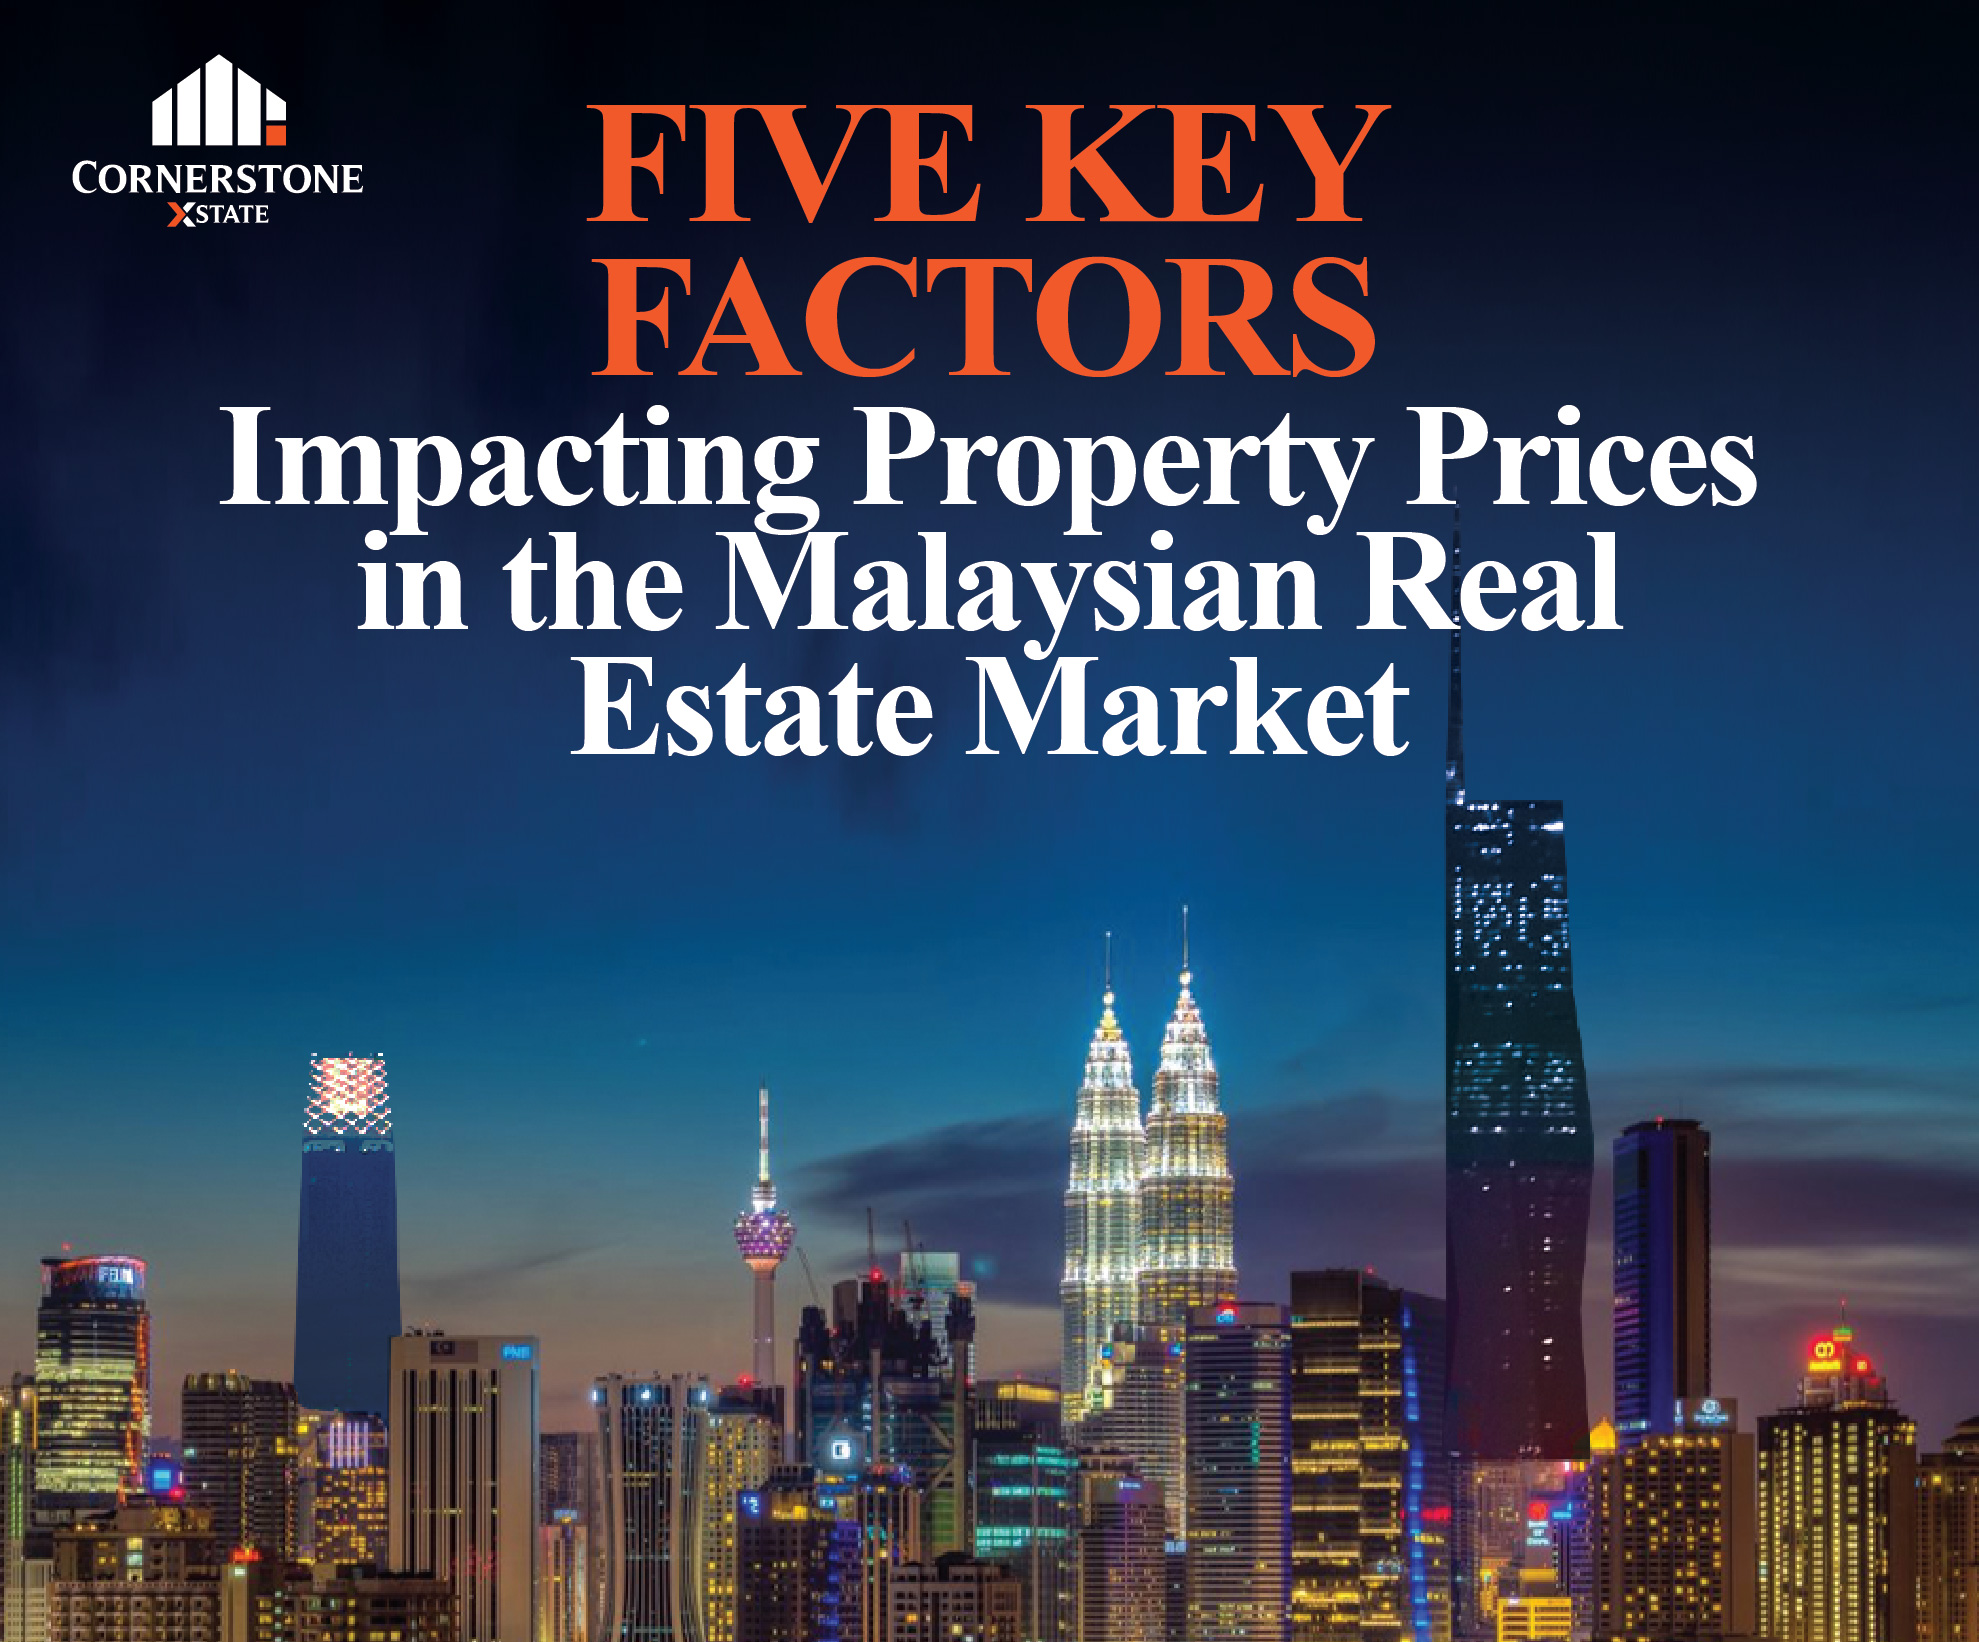 Five Key Factors Impacting Property Prices in the Malaysian Real Estate Market